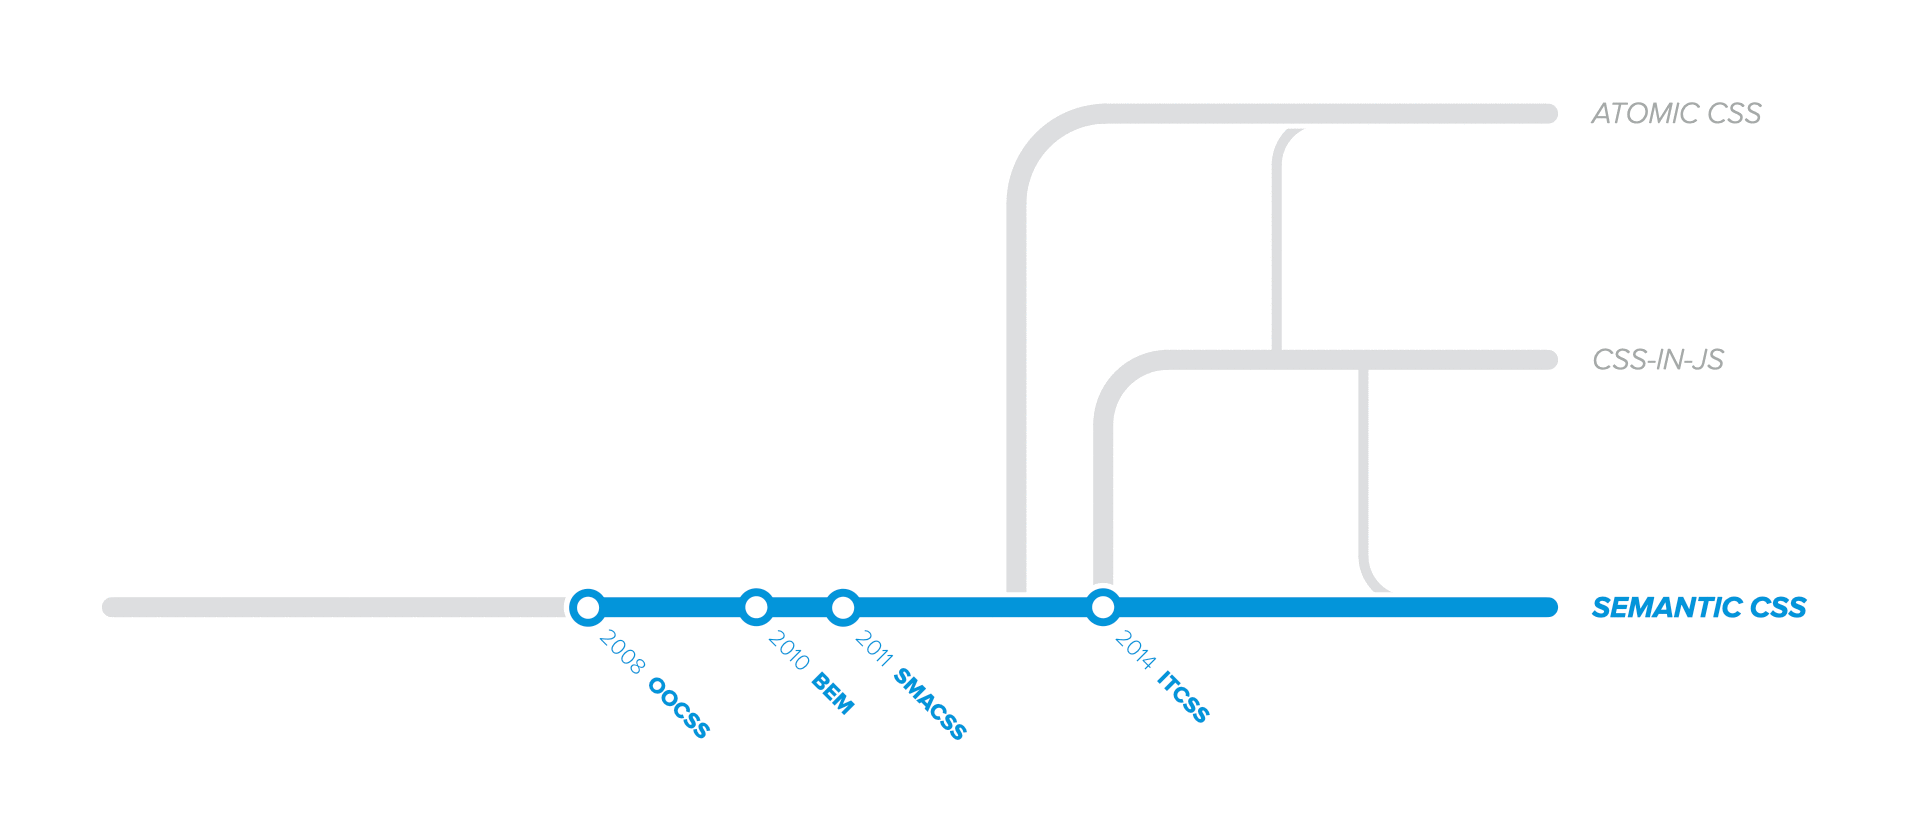 Timeline of scalable CSS evolution, highlighting the main timeline or Semantic CSS (in blue) and pinpoiting the most notable CSS methodologies and architectures: OOCSS in 2008, BEM in 2010, SMACSS in 2011 and ITCSS in 2014